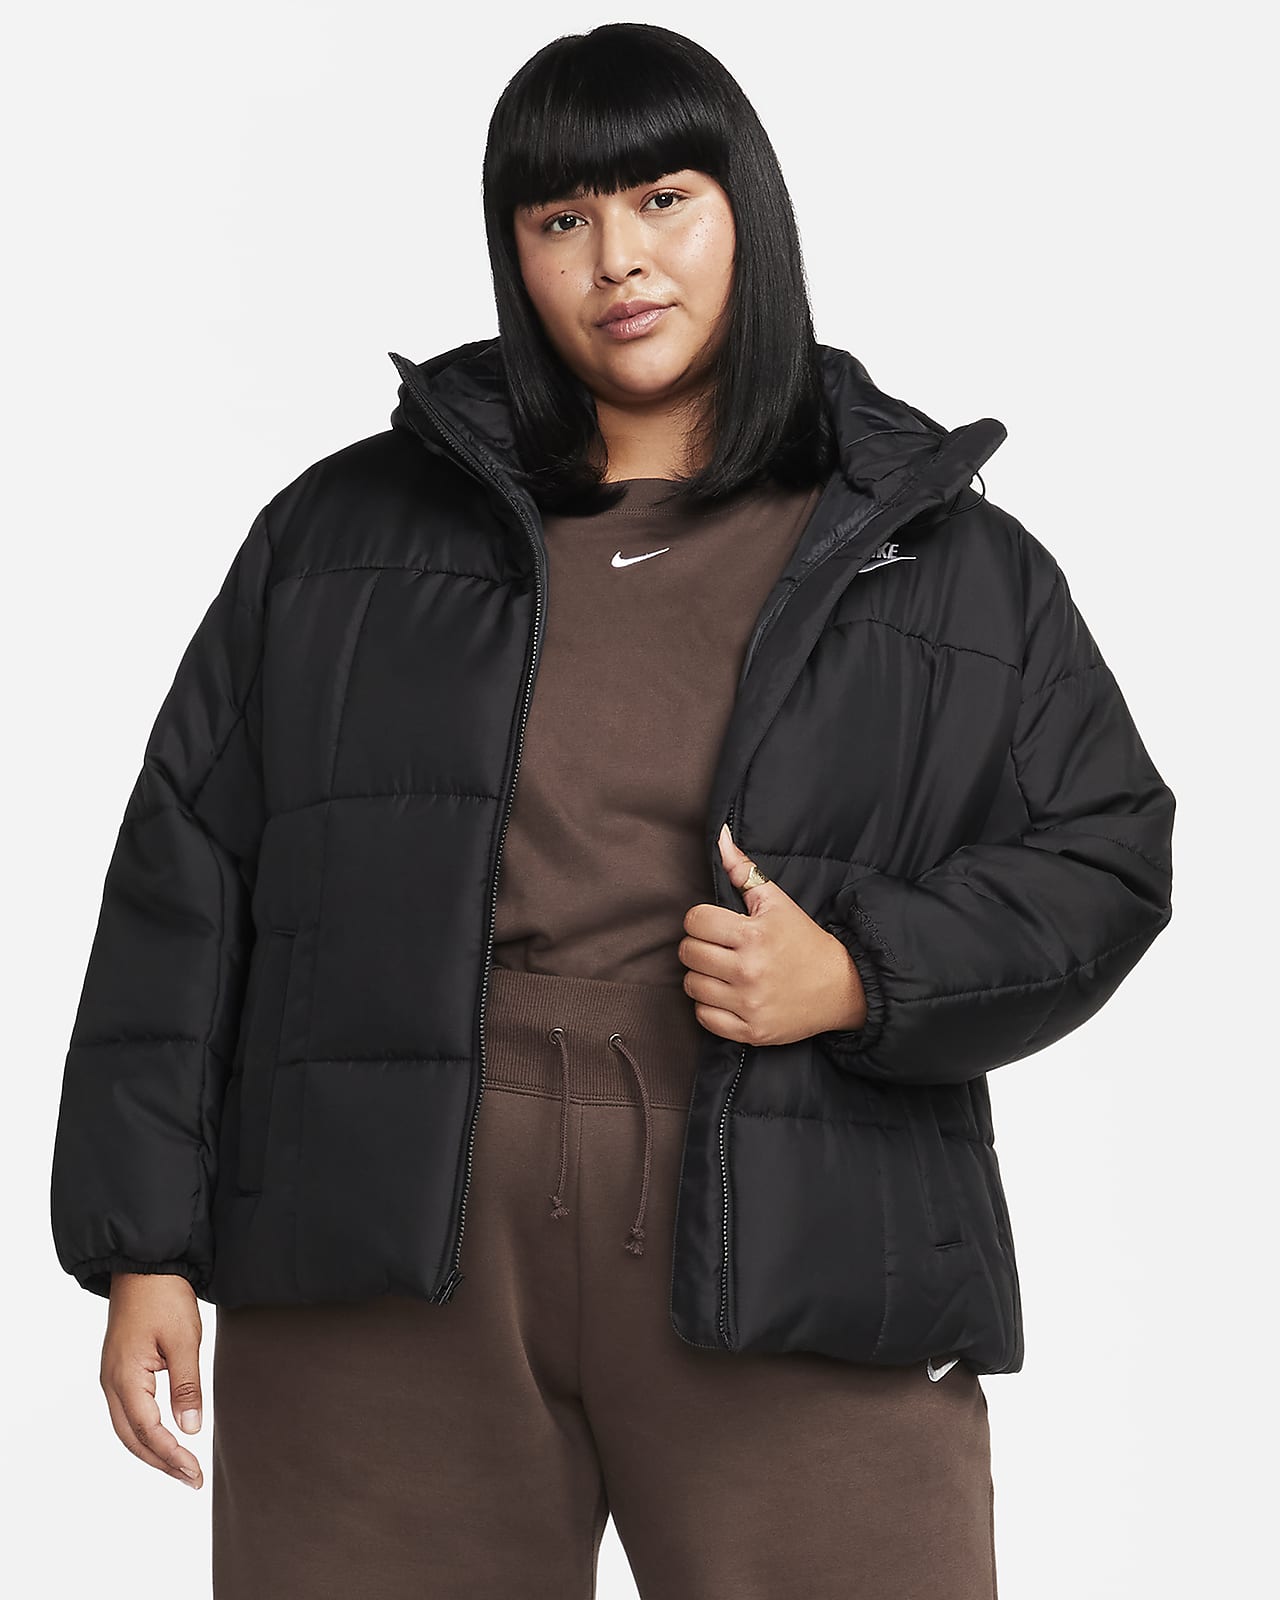 Giacca puffer Therma-FIT Nike Sportswear Essential (Plus size) – Donna